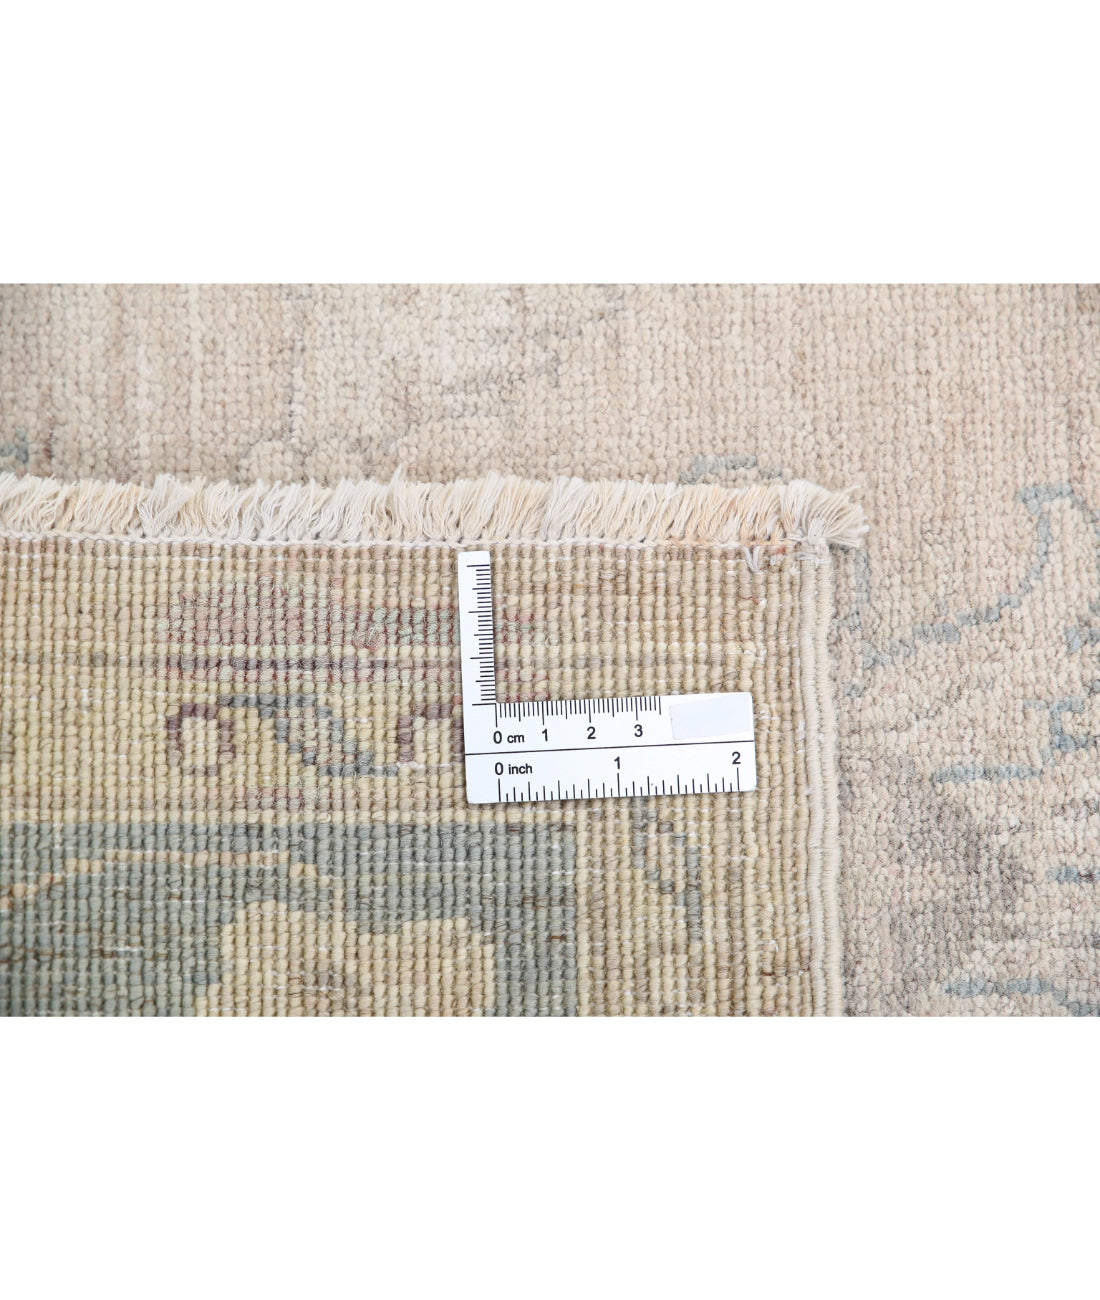 Hand Knotted Serenity Wool Rug - 2'2'' x 3'2'' 2'2'' x 3'2'' (65 X 95) / Brown / Grey